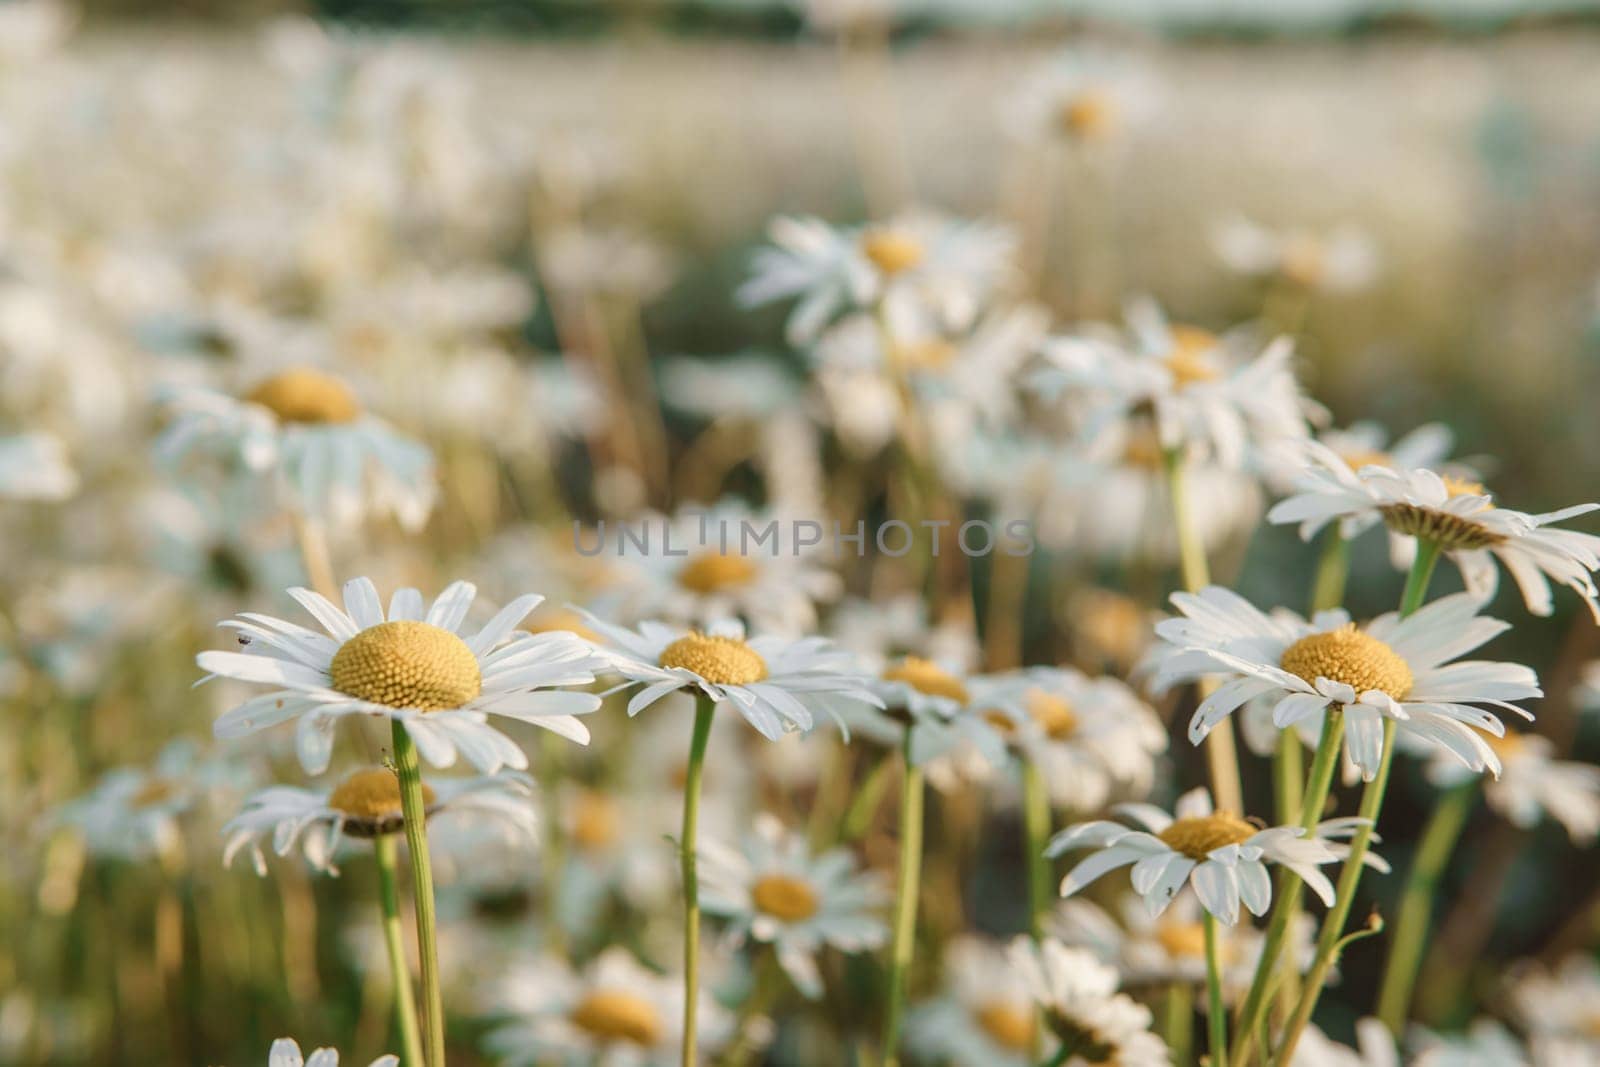 Chamomile flowers in close-up. A large field of flowering daisies. The concept of agriculture and the cultivation of useful medicinal herbs. by Annu1tochka